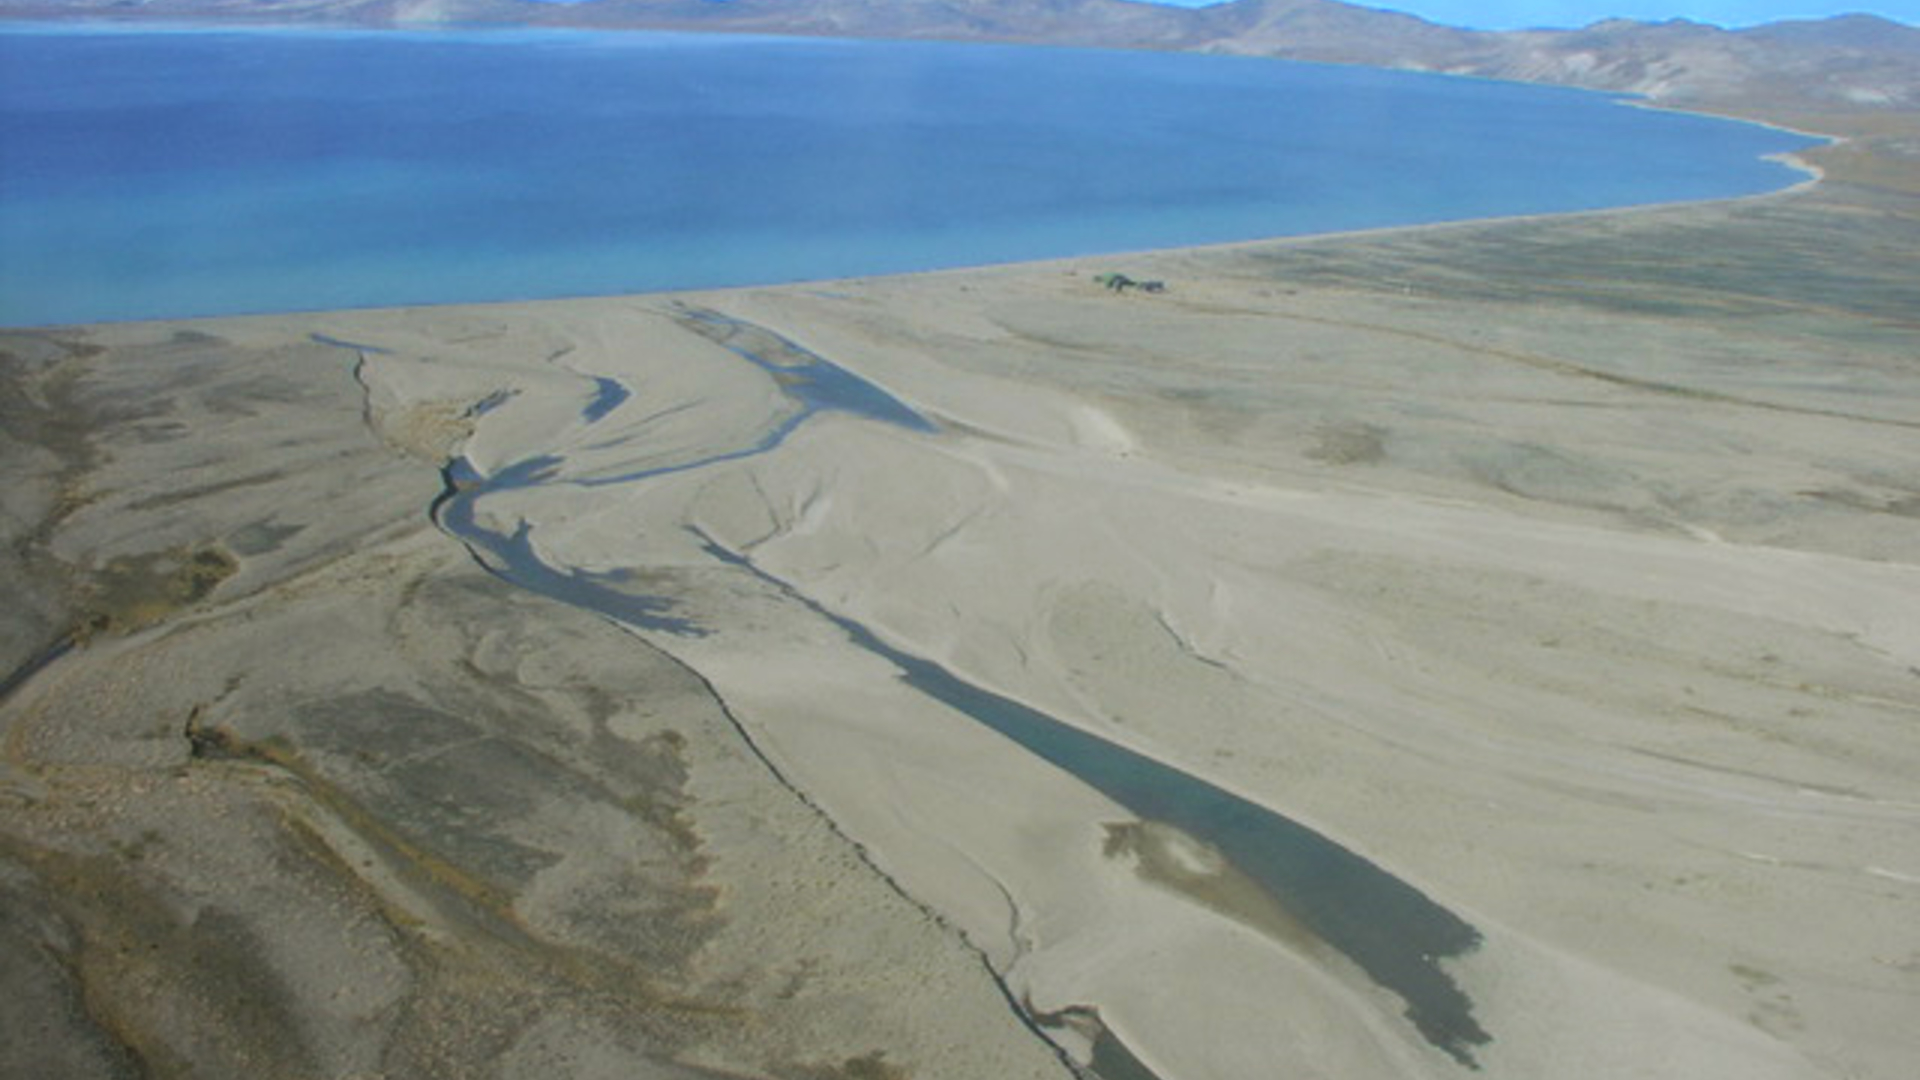 Image of Lake El´gygytgyn from above.